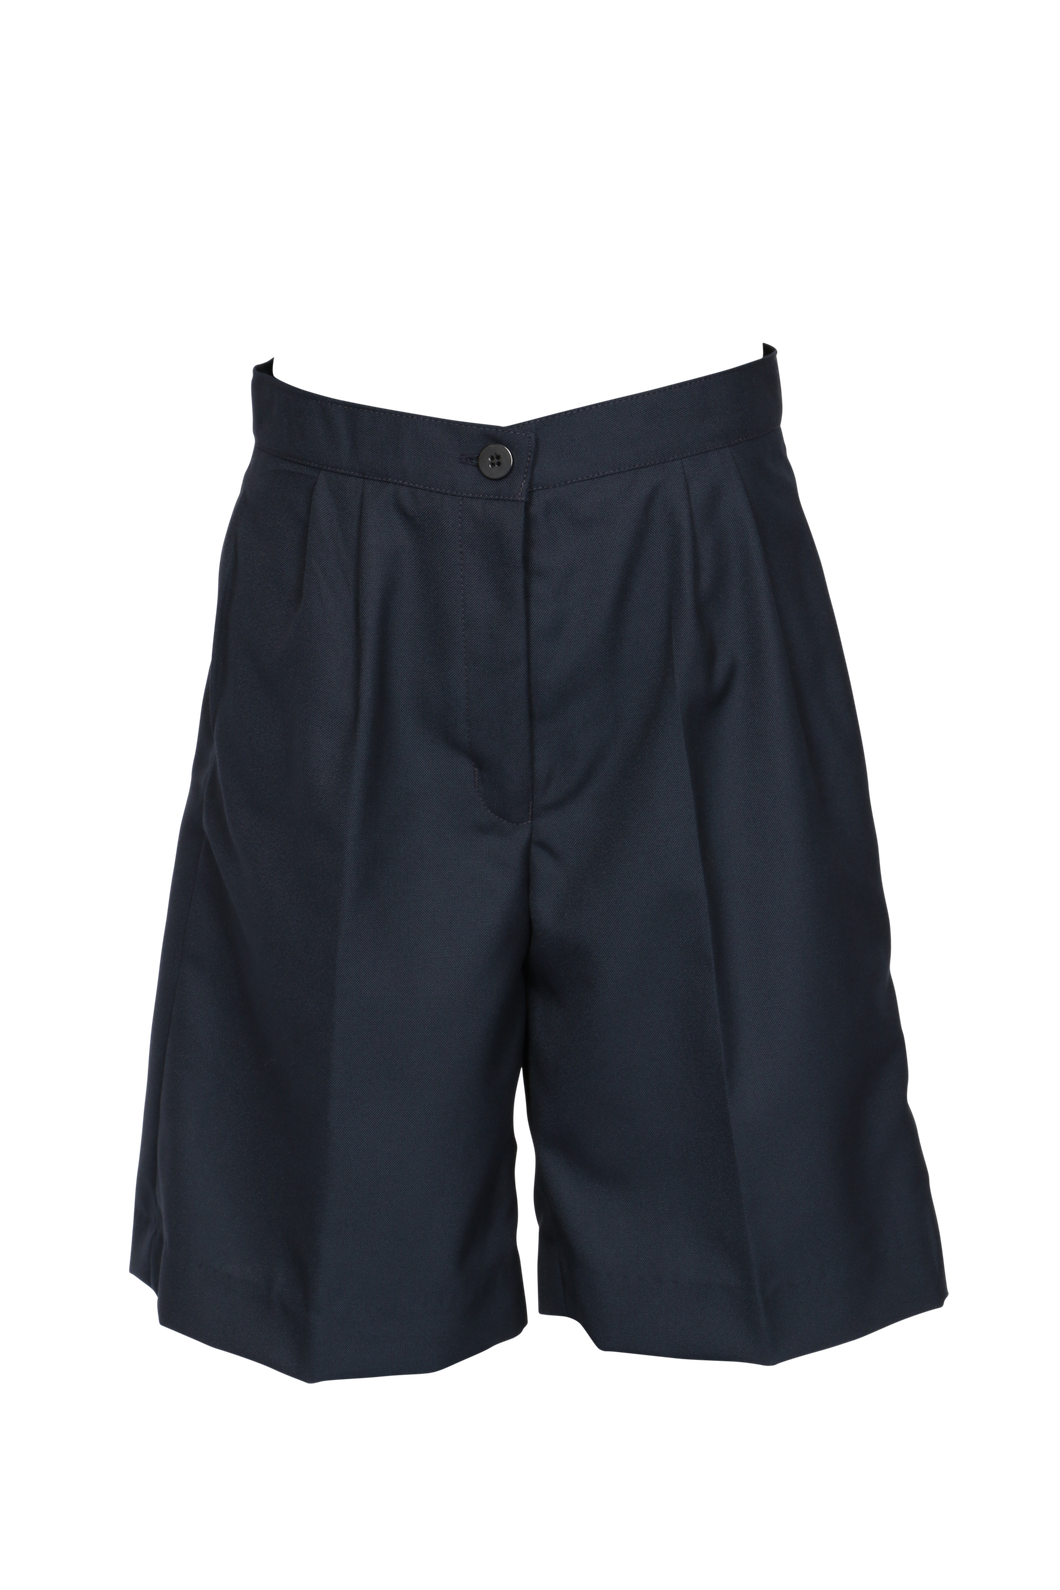 City Shorts with Adjustable Waist – Years 4 - 8 (SKG)